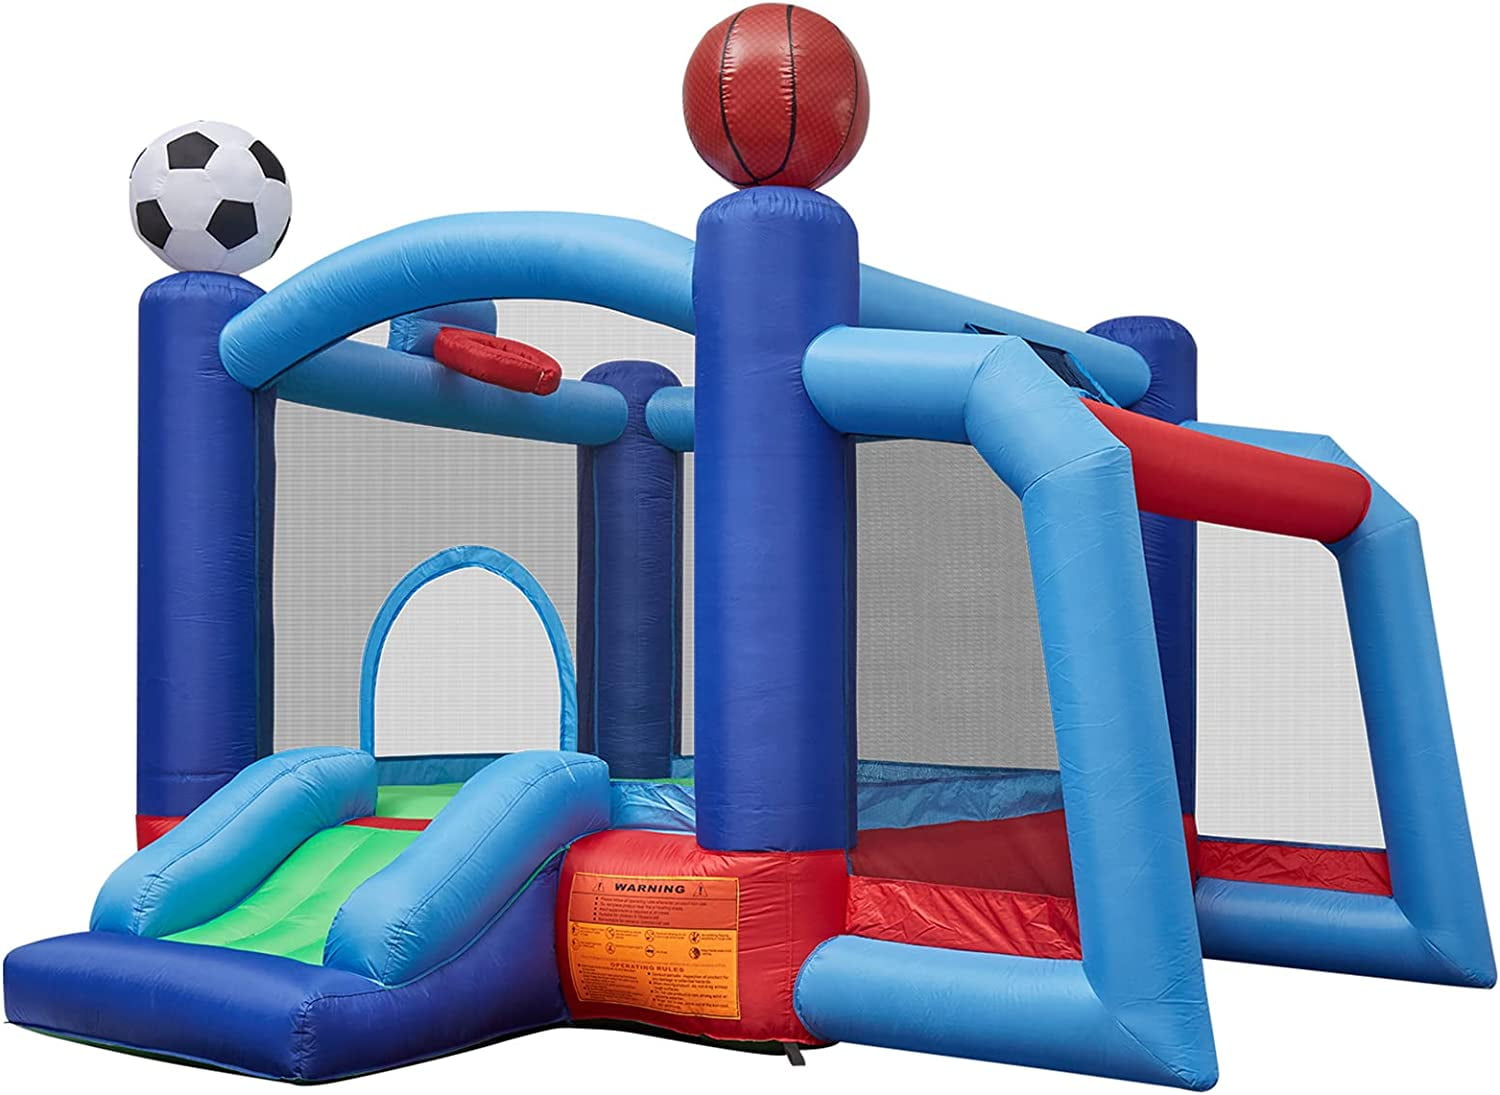 ACTION AIR Bounce House, Inflatable Bouncer with Air Blower 